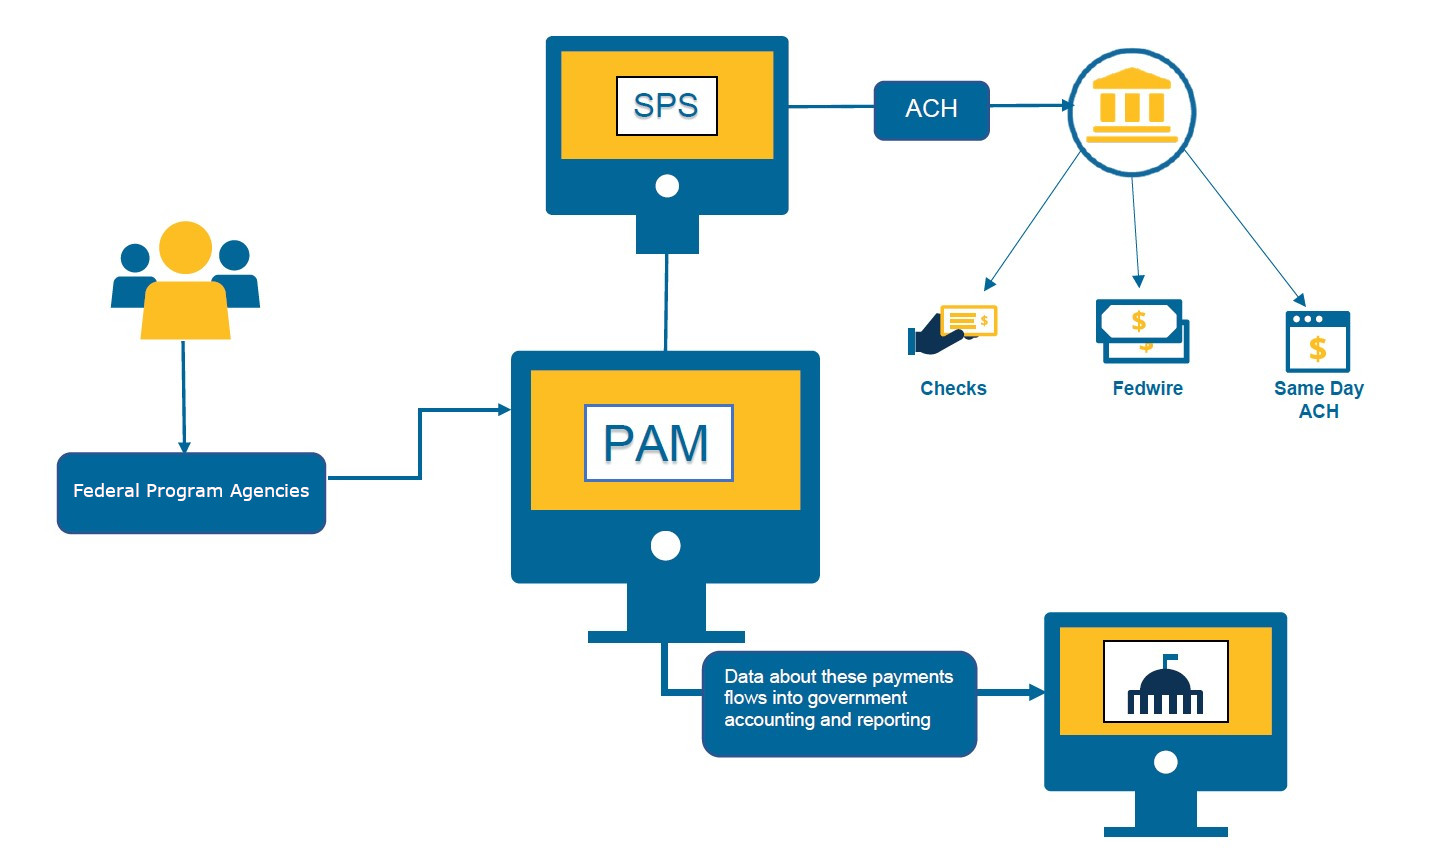 Payment Automation Manager (PAM)